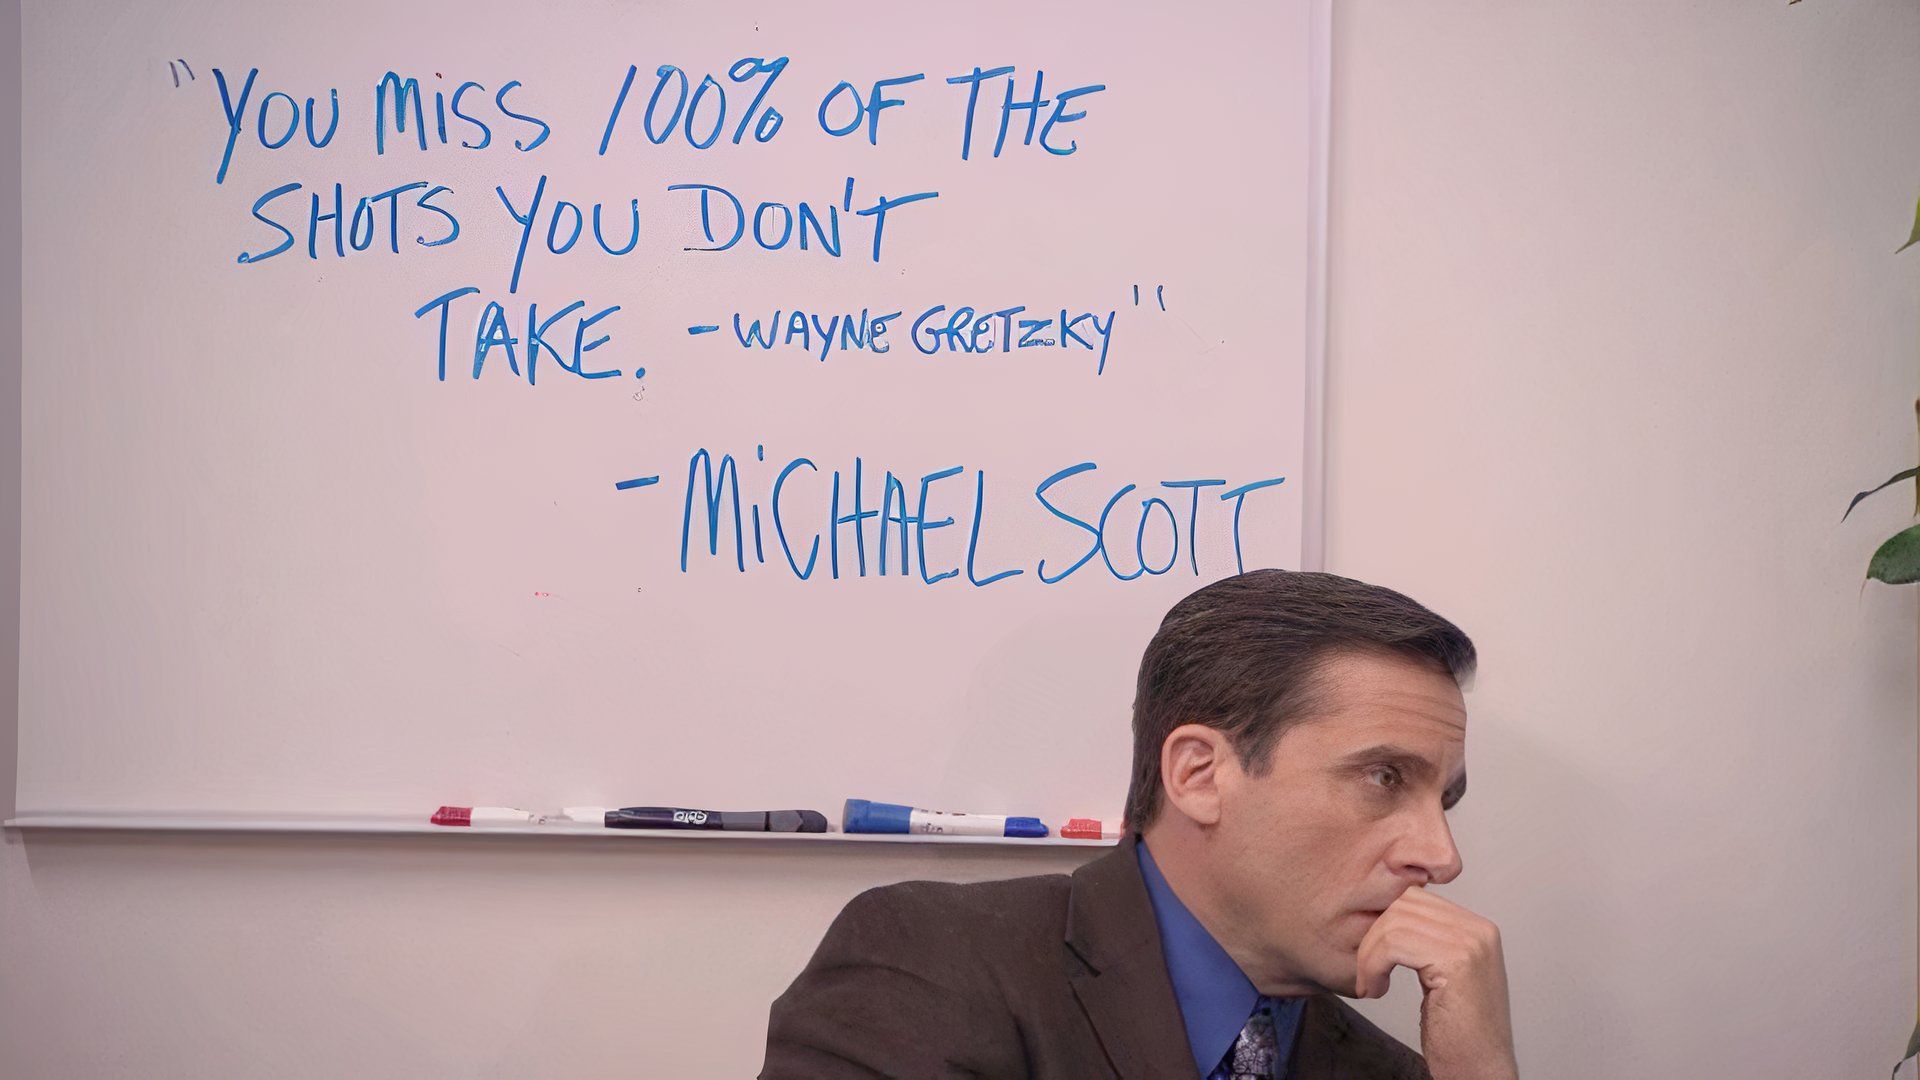 Quote by Michael Scott Wayne Gretzky from “The Office”